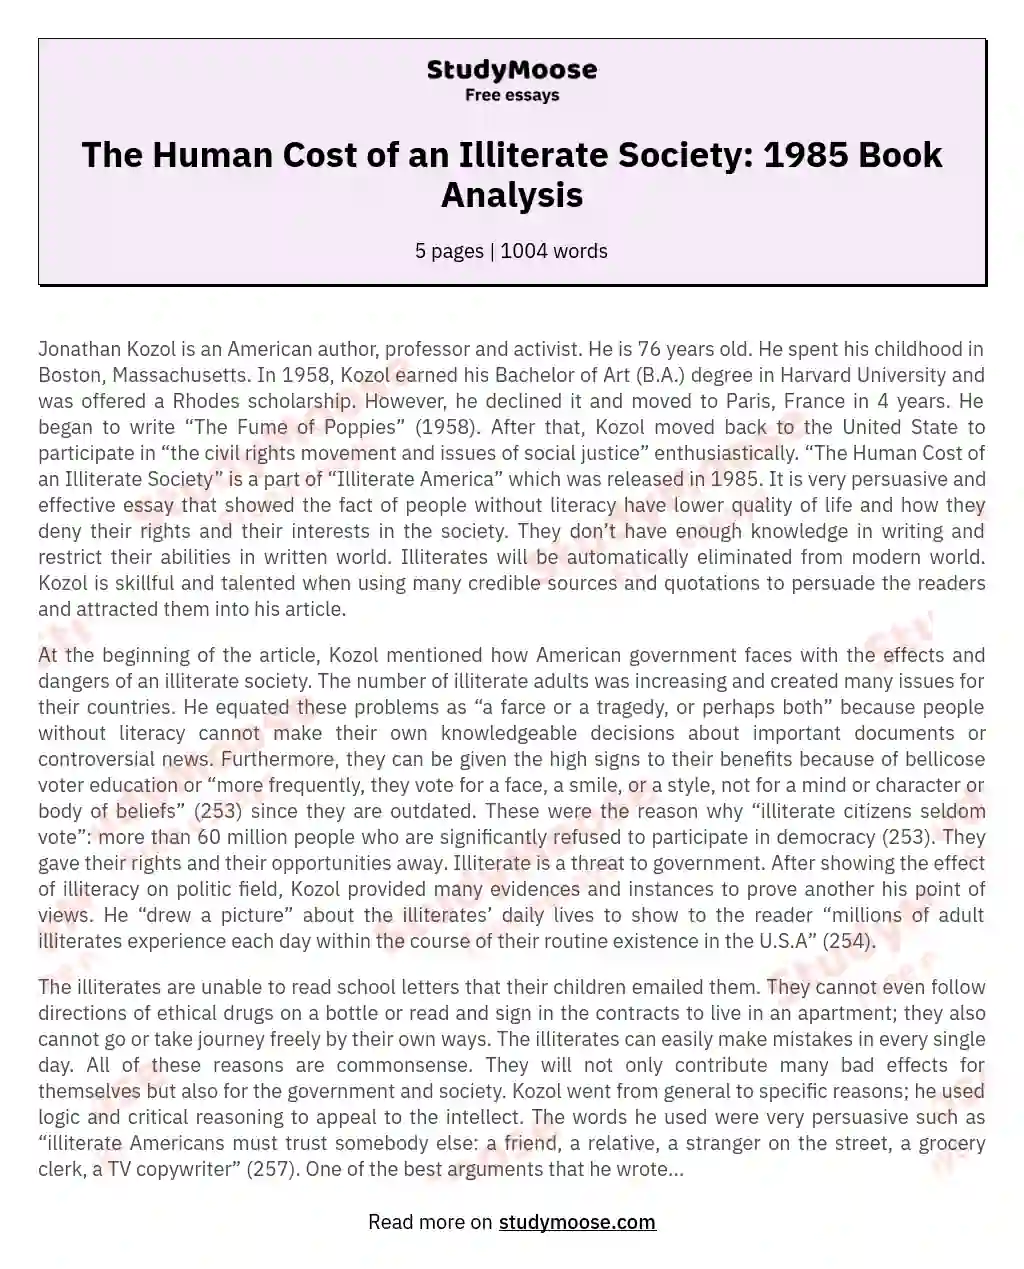 The Human Cost of an Illiterate Society: 1985 Book Analysis essay